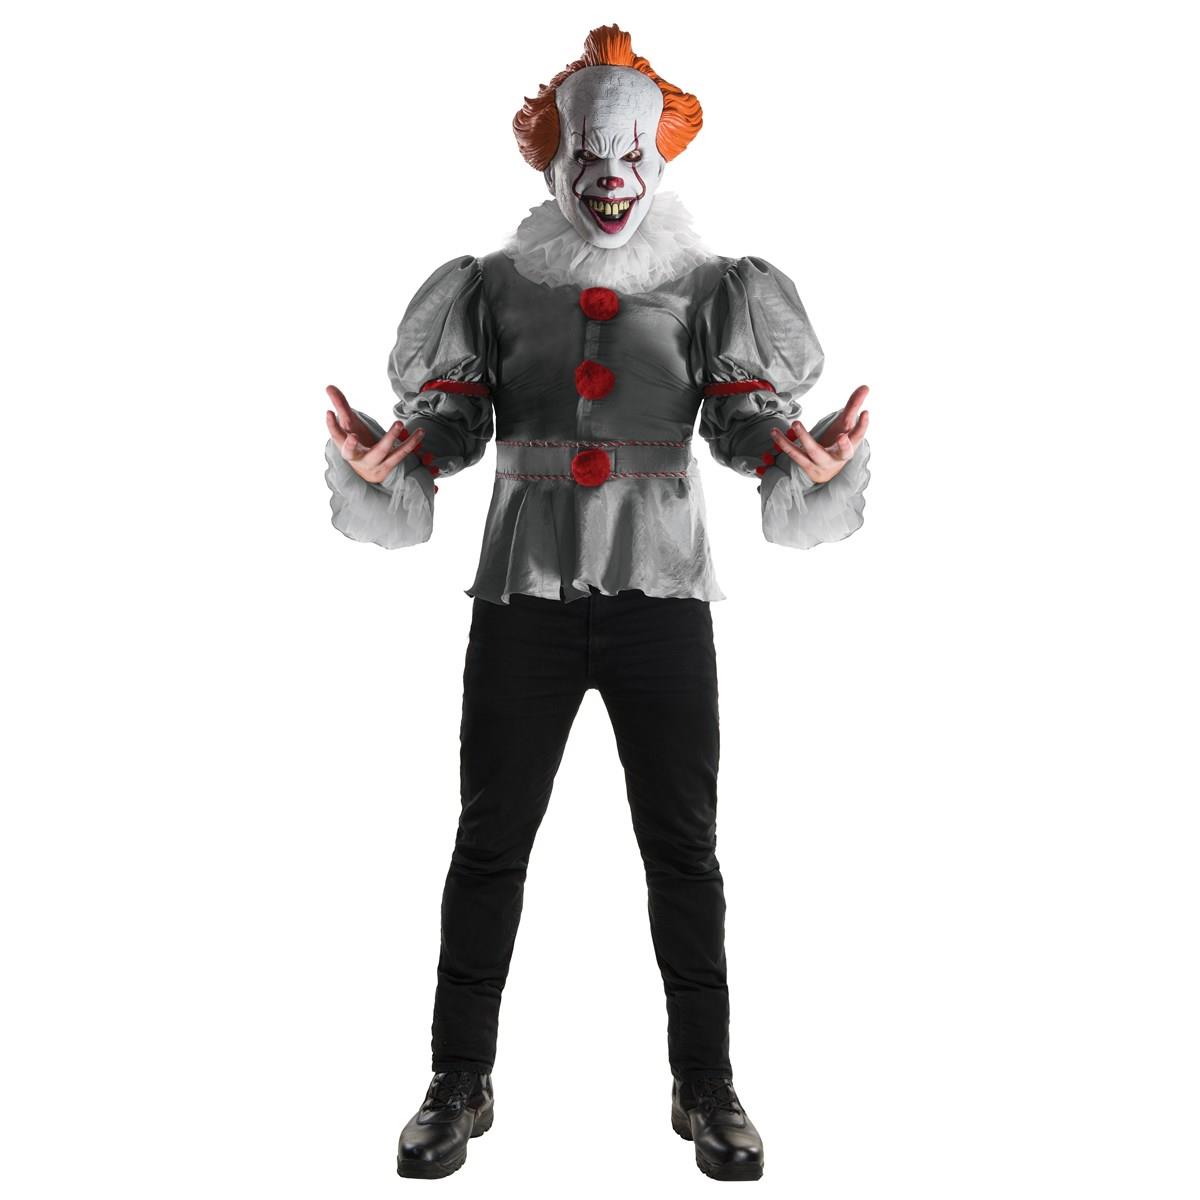 Picture of Rubies 274174 IT Pennywise Deluxe Adult Costume - Standard